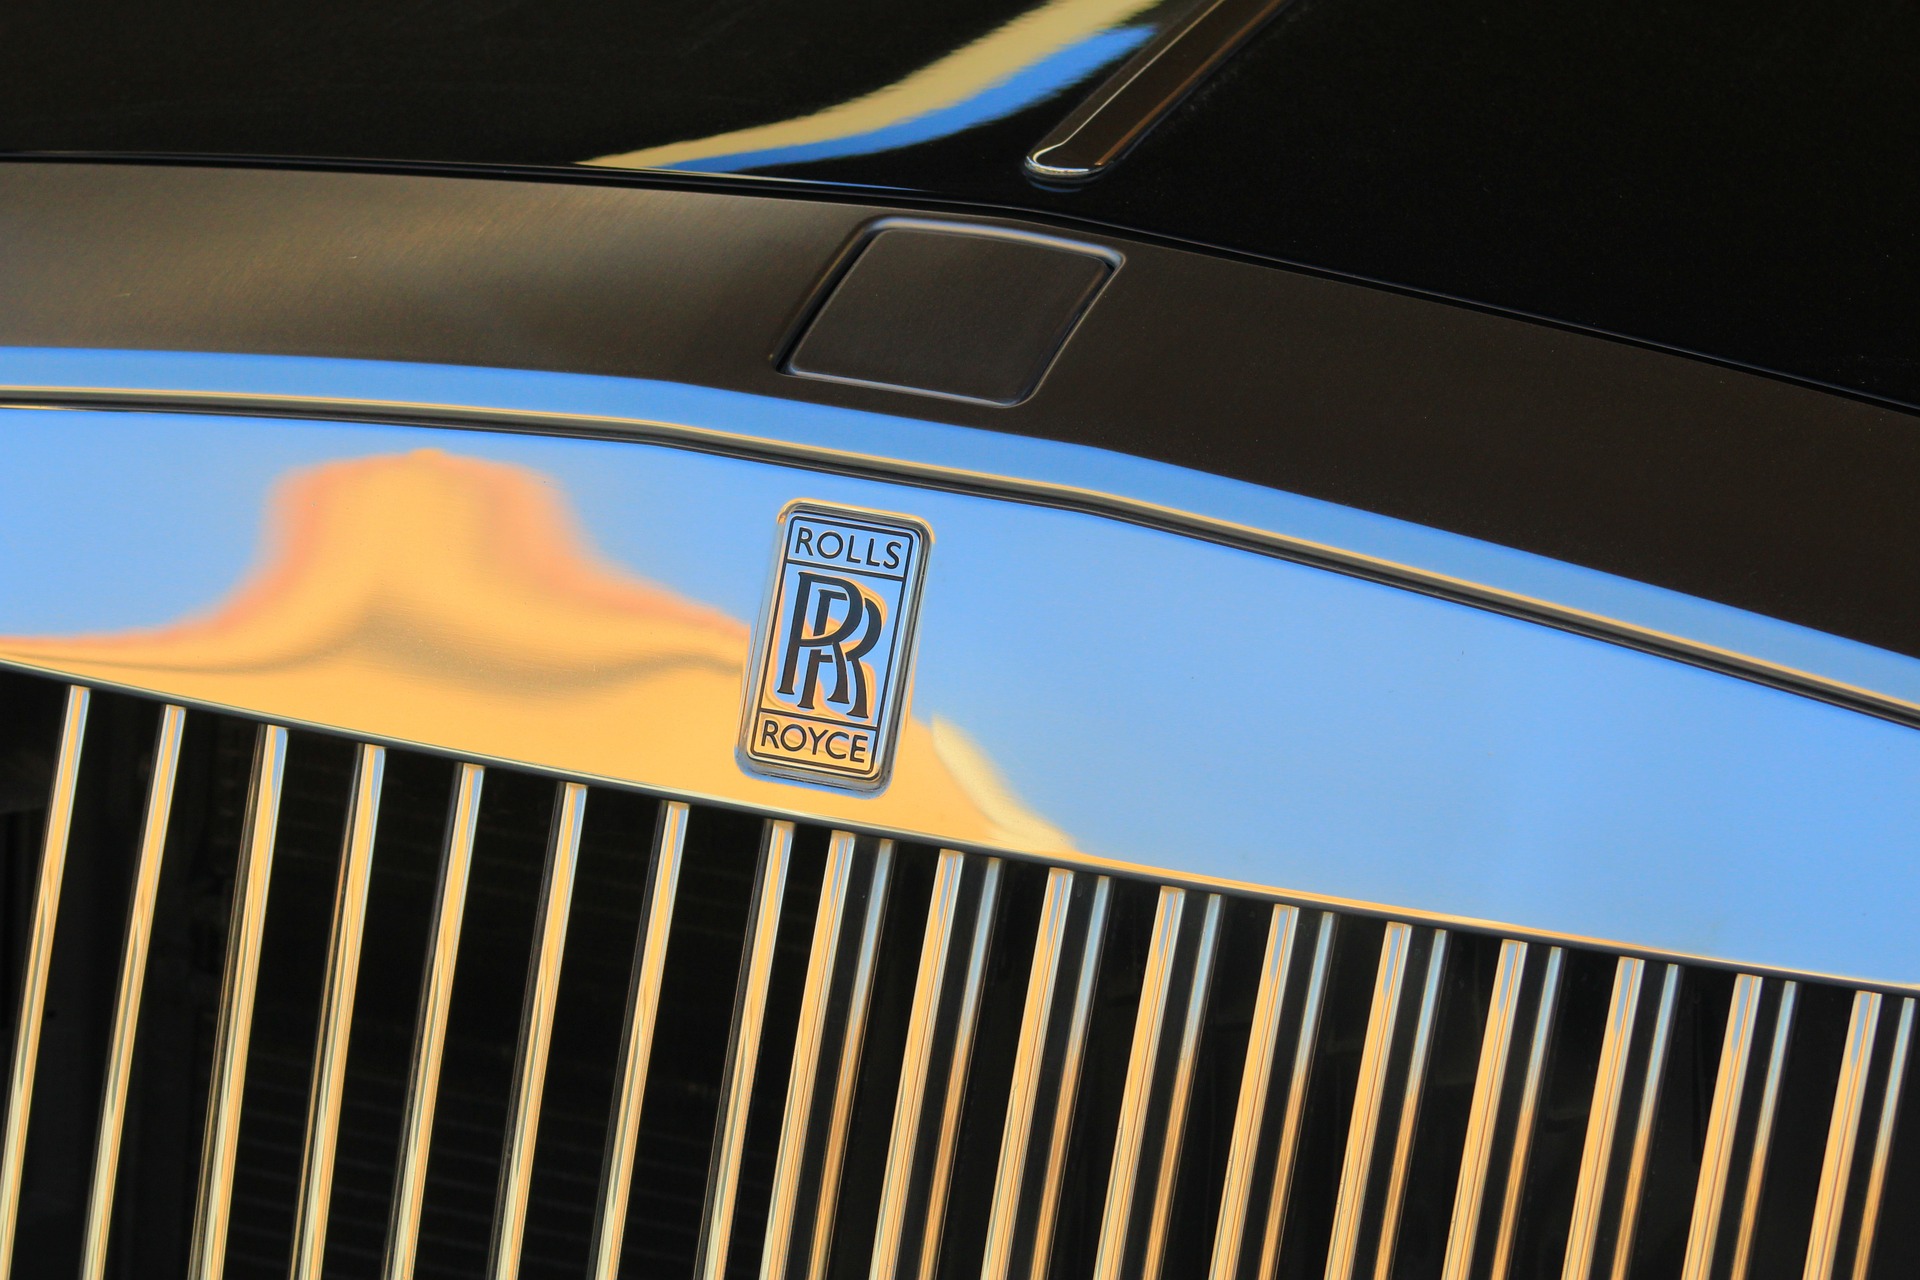 A close-up picture of a front grill and the Rolls-Royce logo